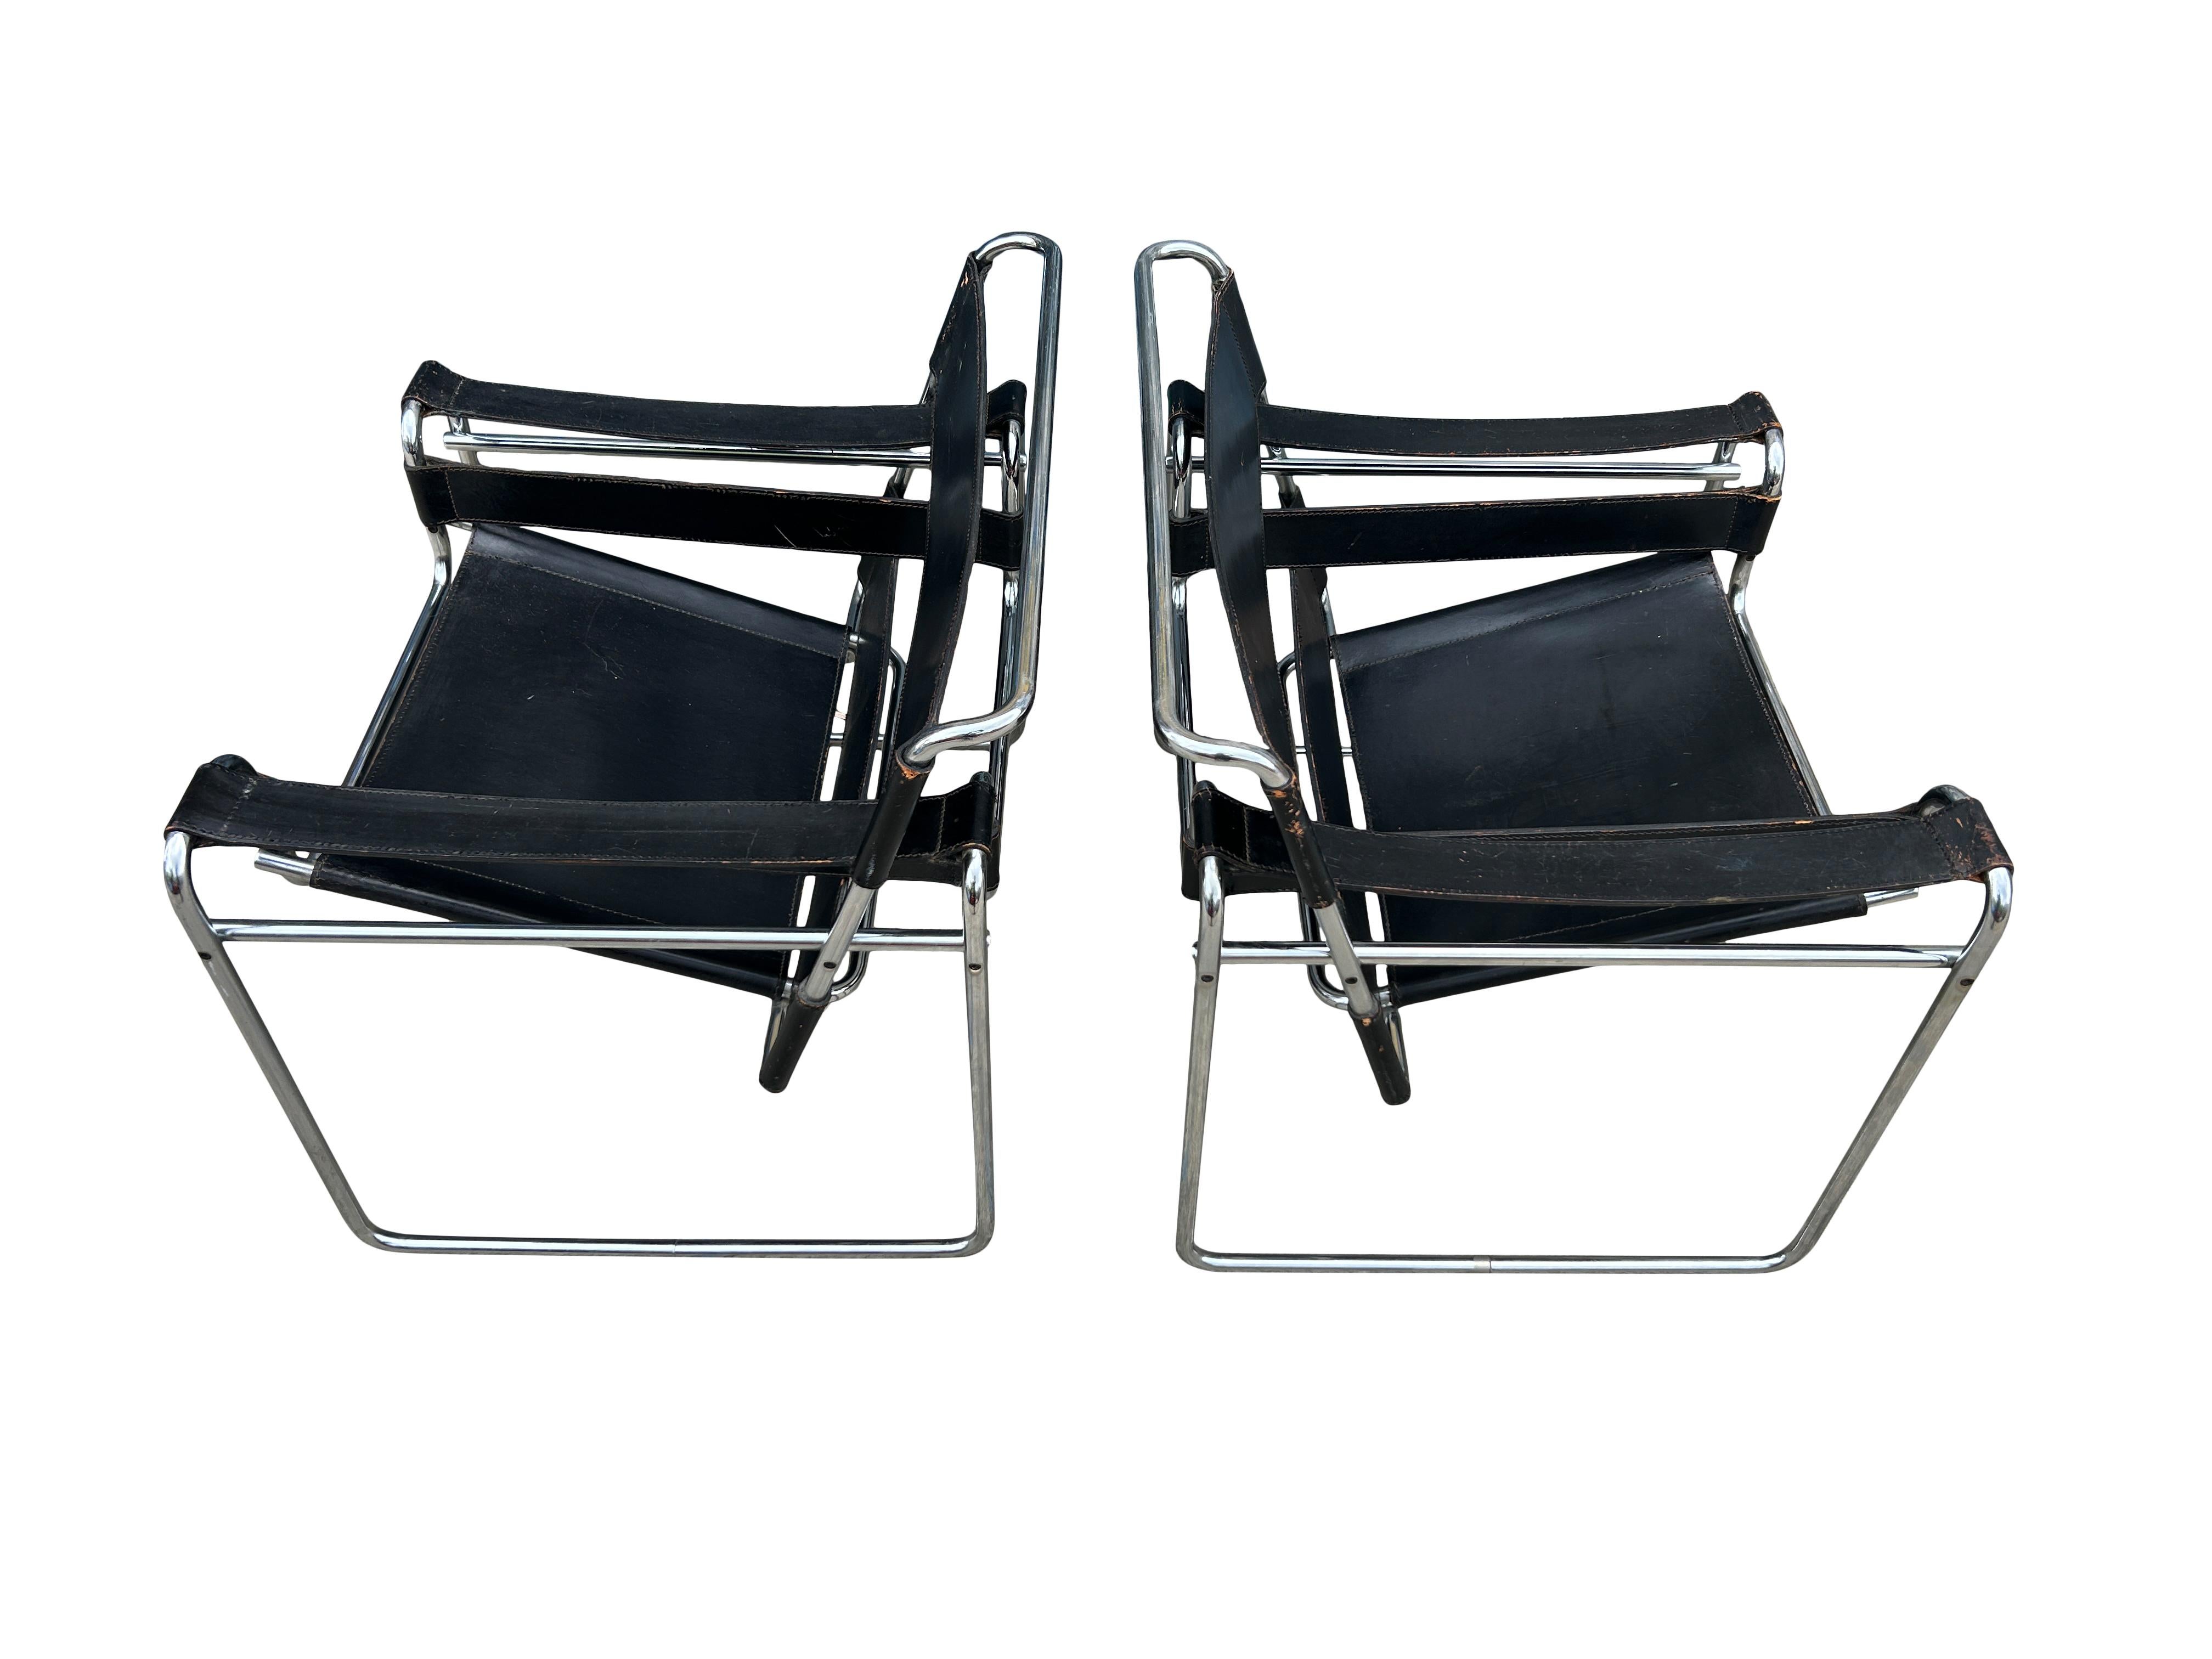 Pair of Vintage Mid-Century Modern Black leather wassily lounge chairs for Knoll. The Wassily lounge chair was designed by Marcel Breuer in Balck full leather. This vintage Pair has paperwork to verify authenticity. also has flat caps on the end